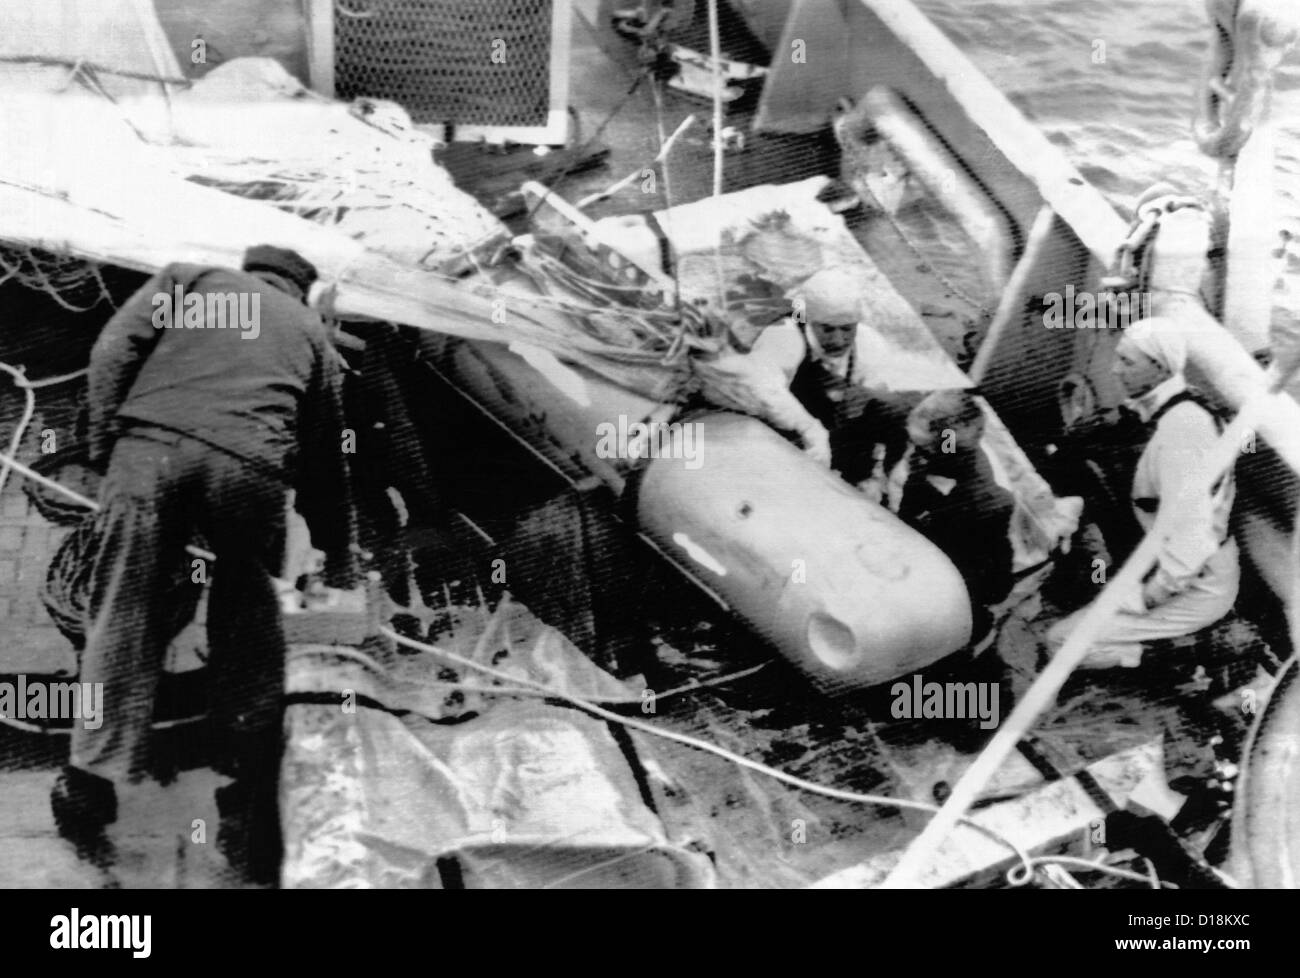 Lost H-bomb recovered off Palomares, Spain. The 10-foot, silver-coated bomb had been missing for 81 days. Three bombs hit the Stock Photo